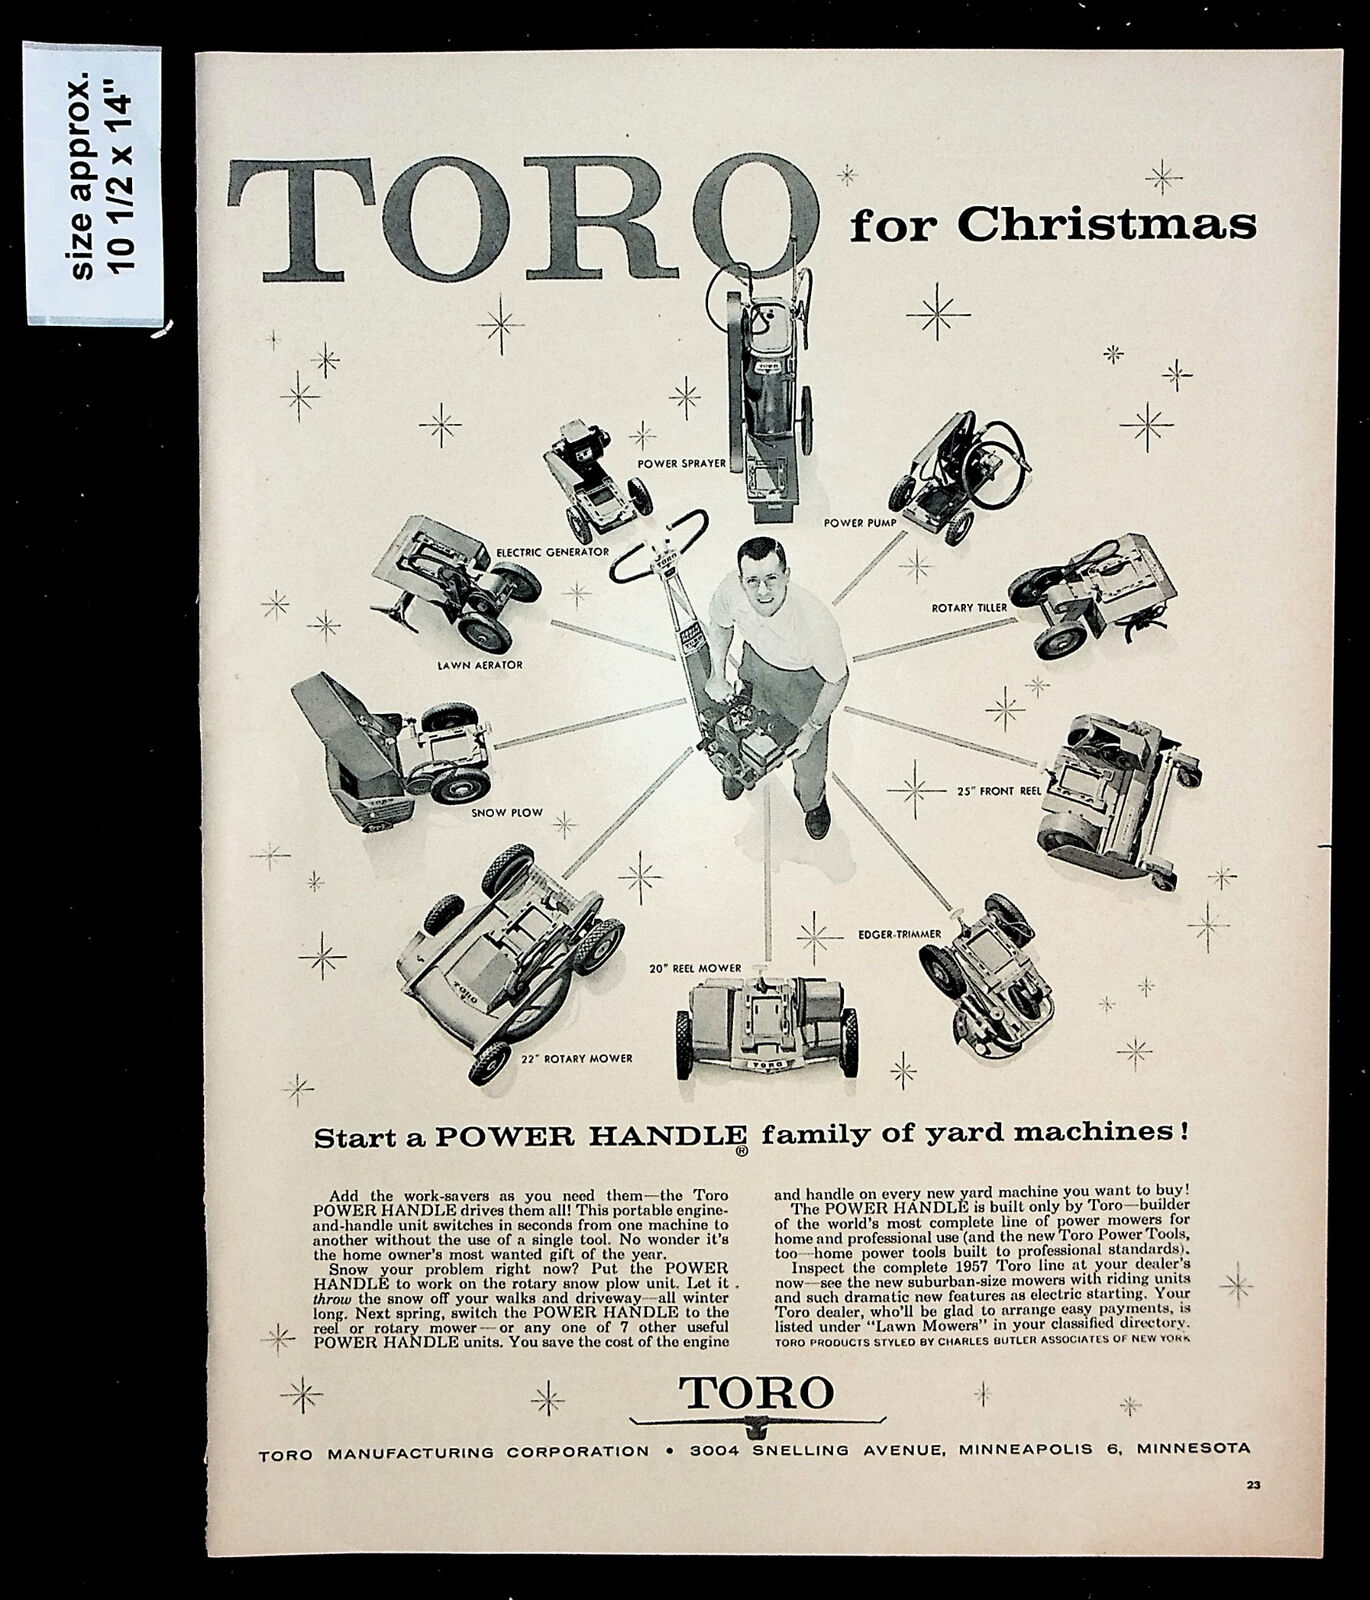 1956 Toro Manufacturing Christmas Gifts Home Lawn Mower Vintage Print Ad 37372